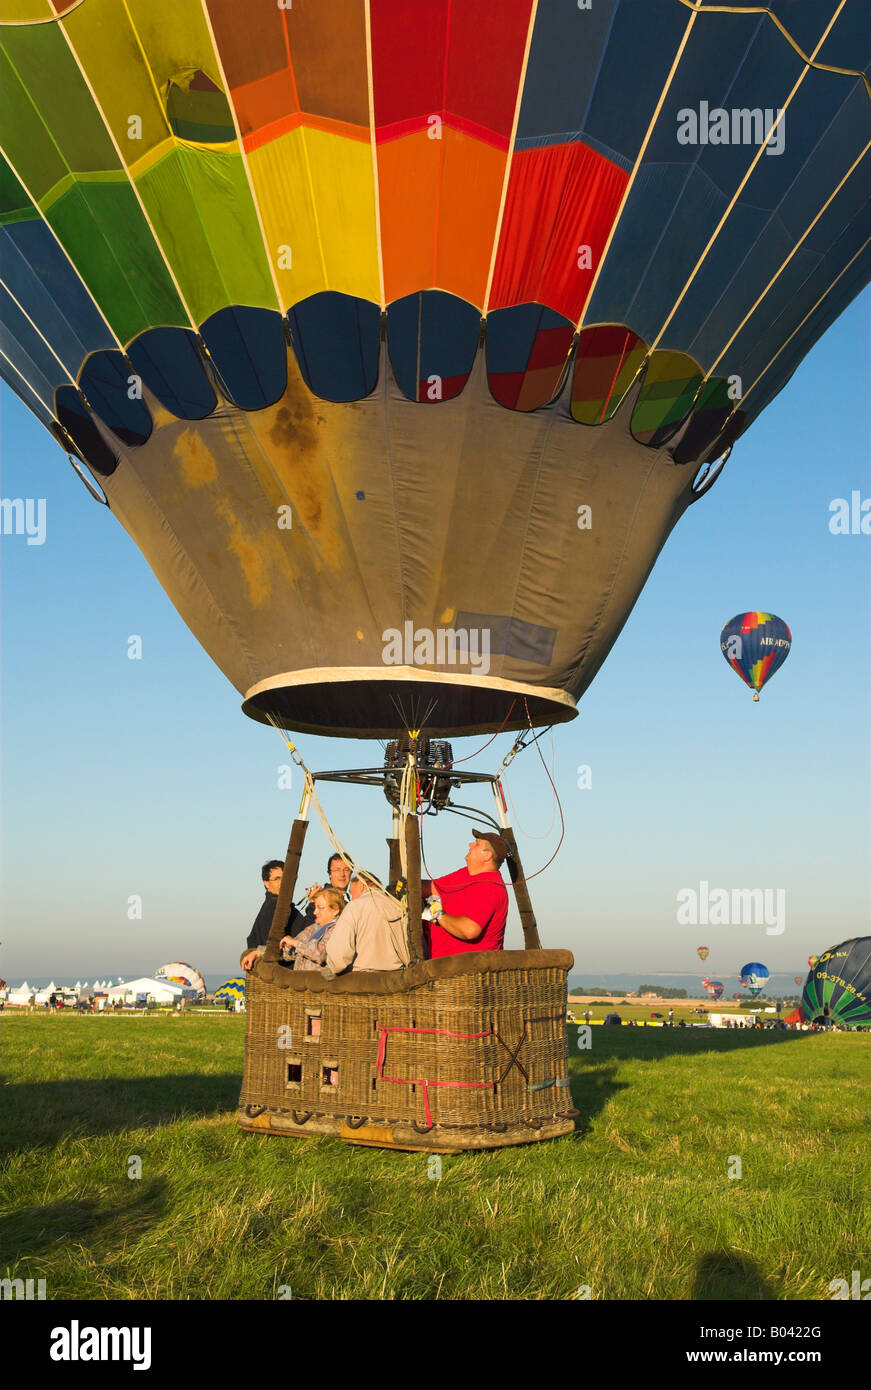 Ballonfahrt High Resolution Stock Photography and Images - Alamy